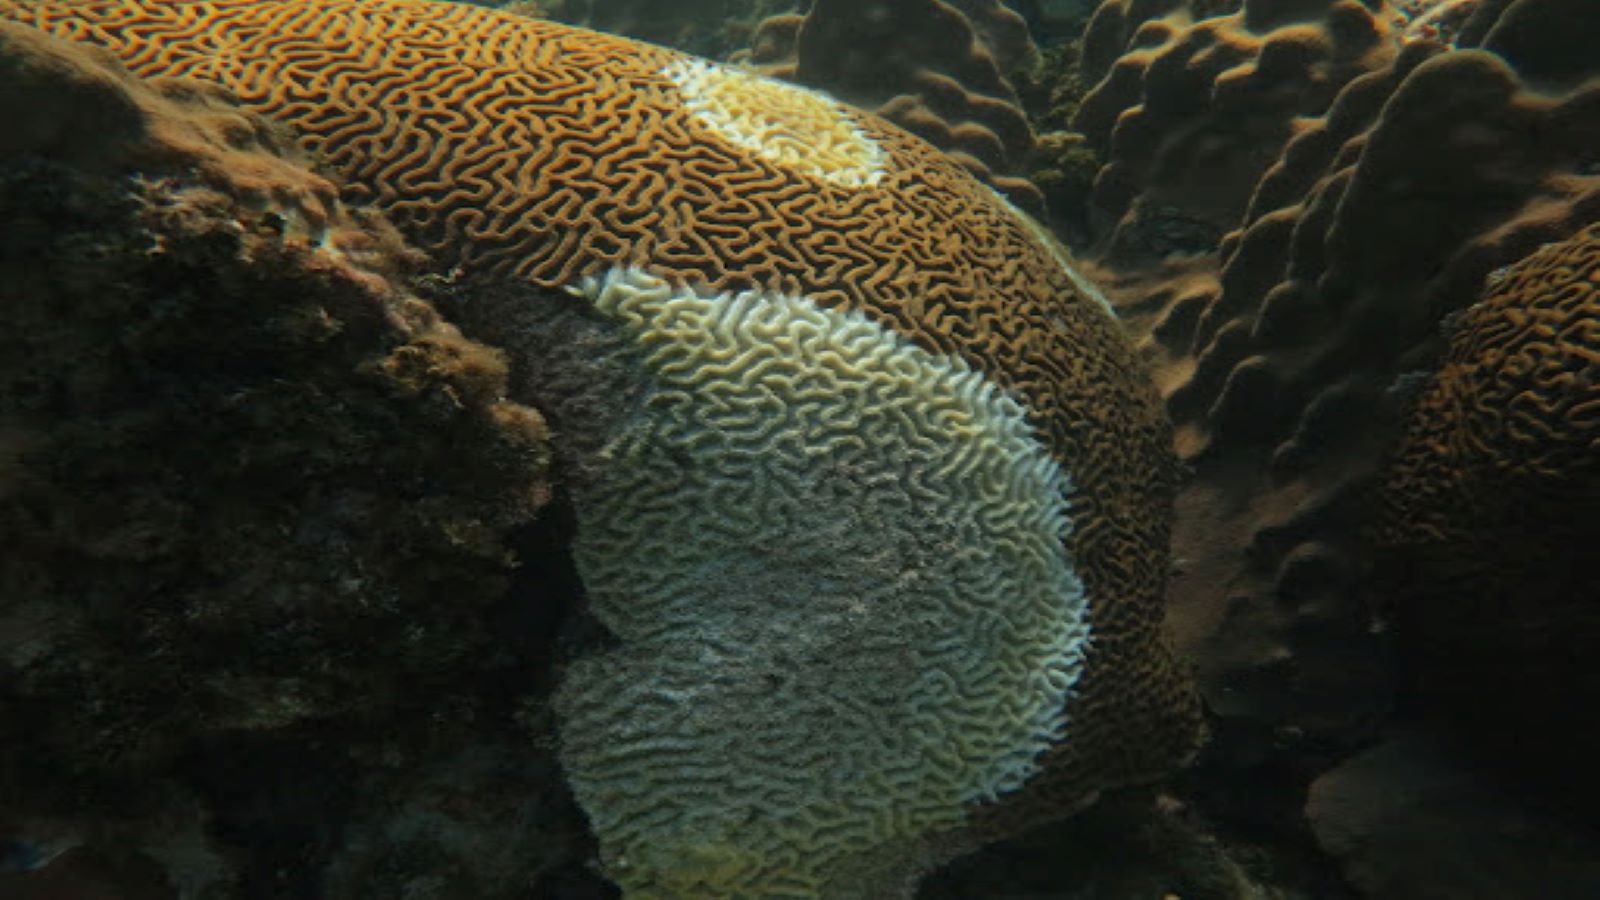 An orange brain coral with white discoloration are lesions caused by stony coral tissue loss disease (SCTLD). The brown coloration is indicative of unaffected areas on the diseased colony. SCTLD is a deadly coral disease that is destroying reefs across Florida and the Caribbean.